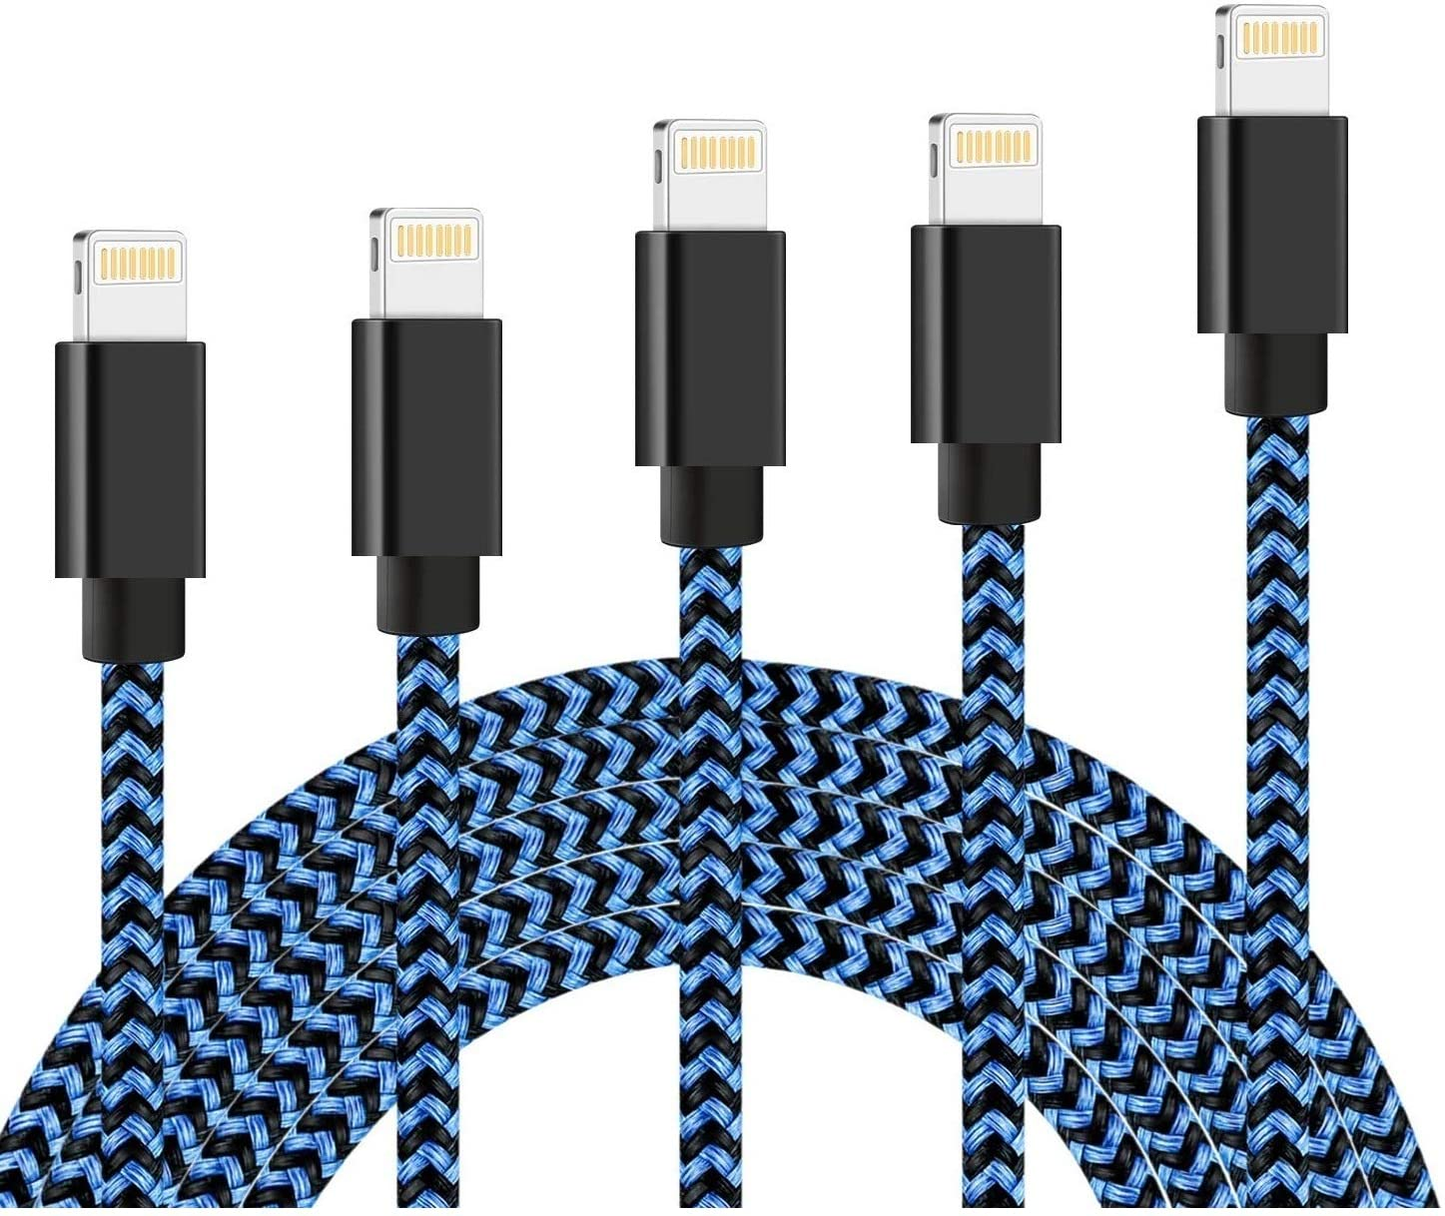 Iphone Charger, Mfi Certified I Phone Cable 4 Pack [3/6/6/10FT] Extra Long Nylon Braided USB Charging&Syncing Cord 